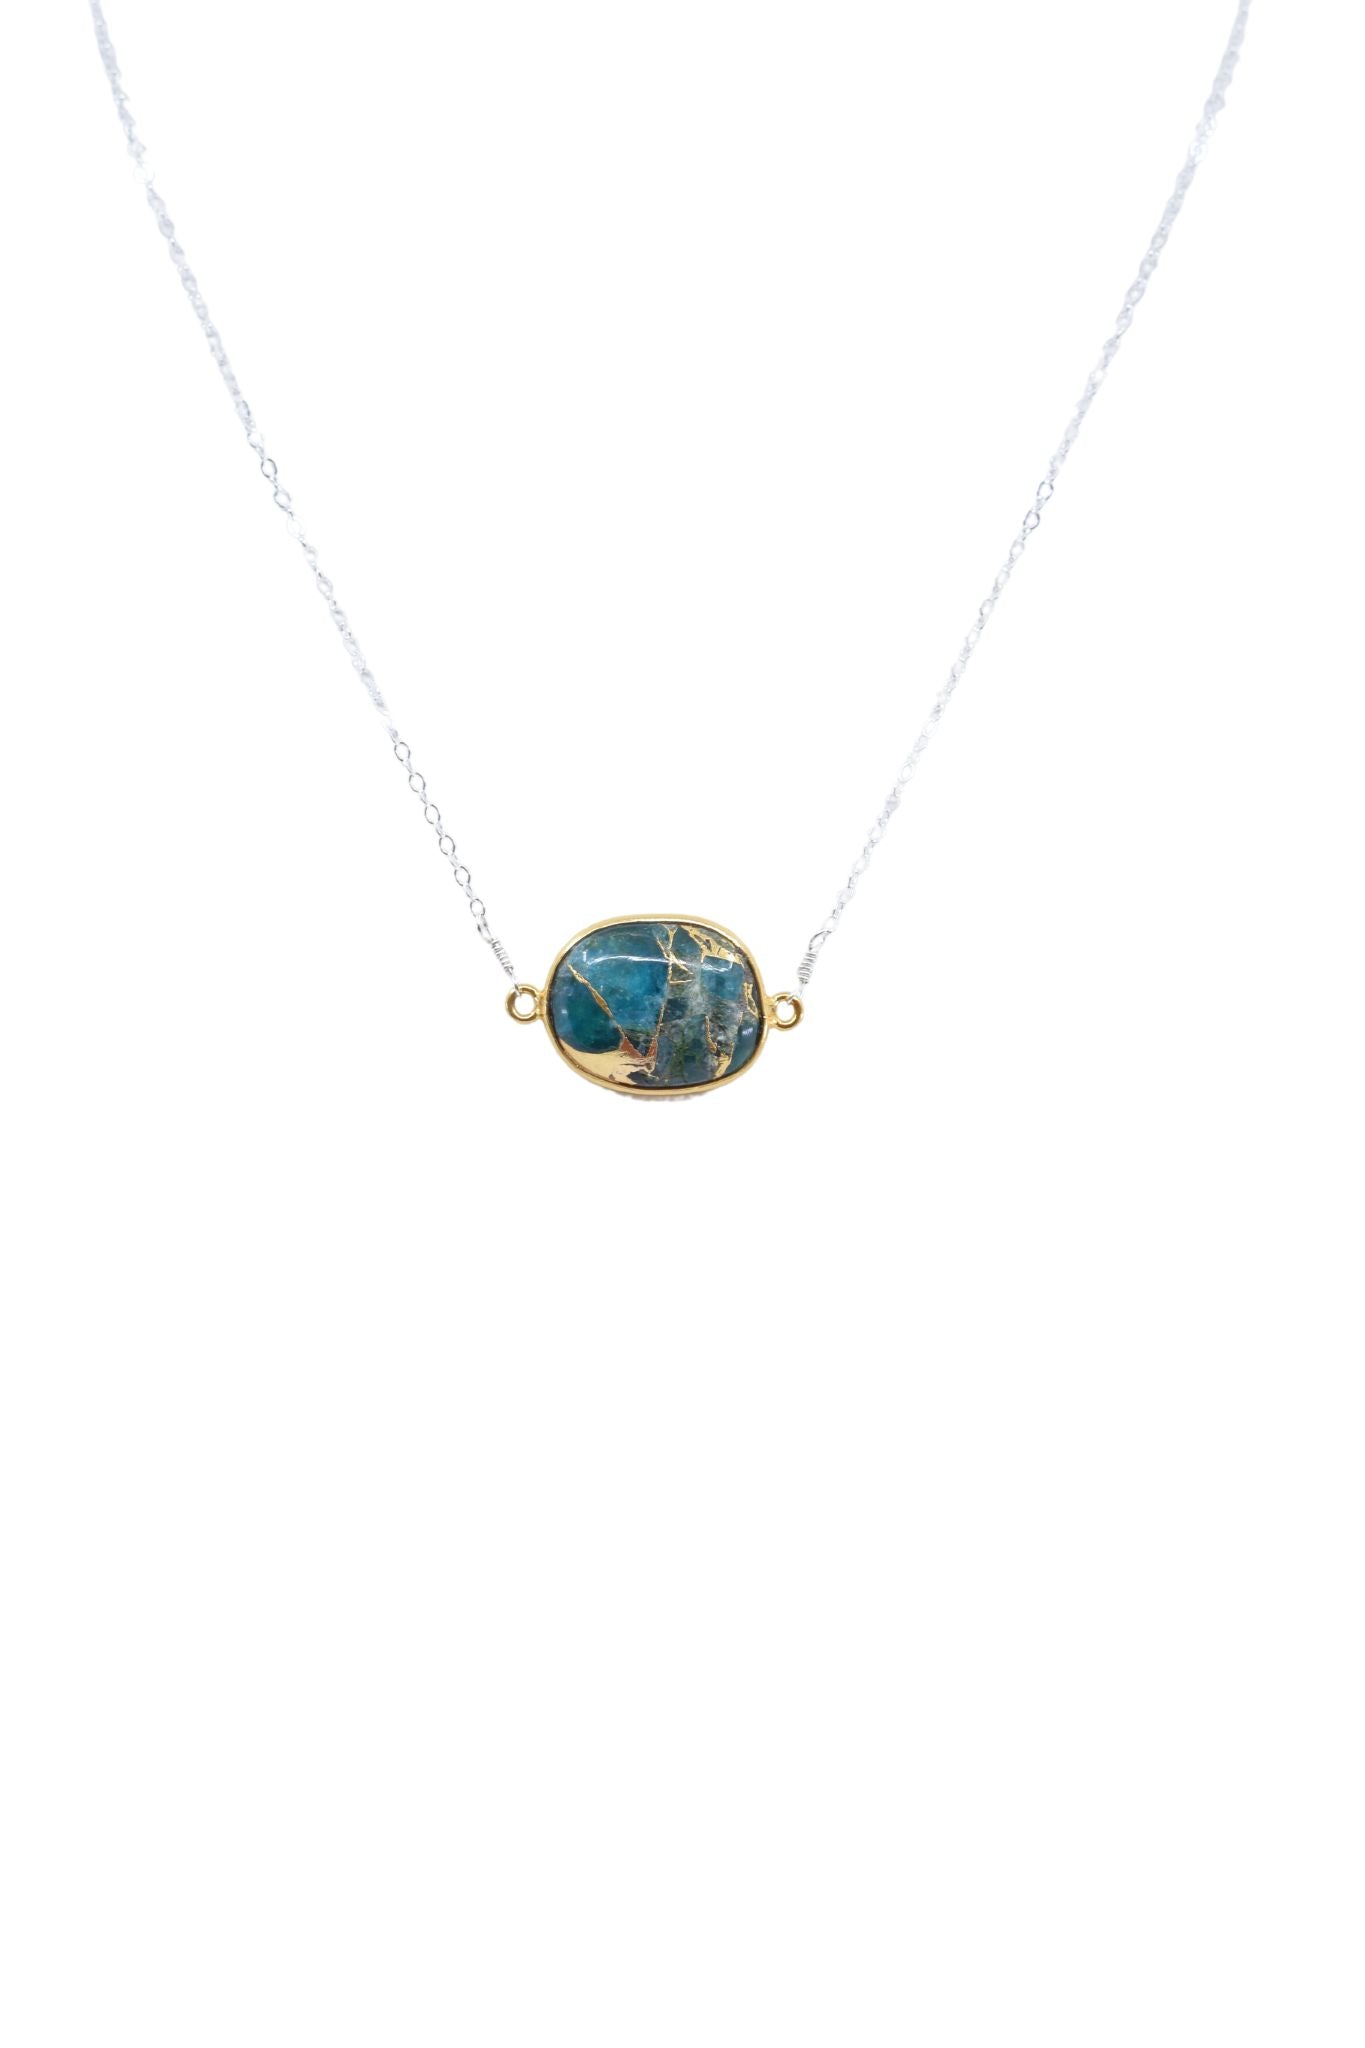 Mrs. Parker Necklace  in Teal Mojave Copper Turquoise